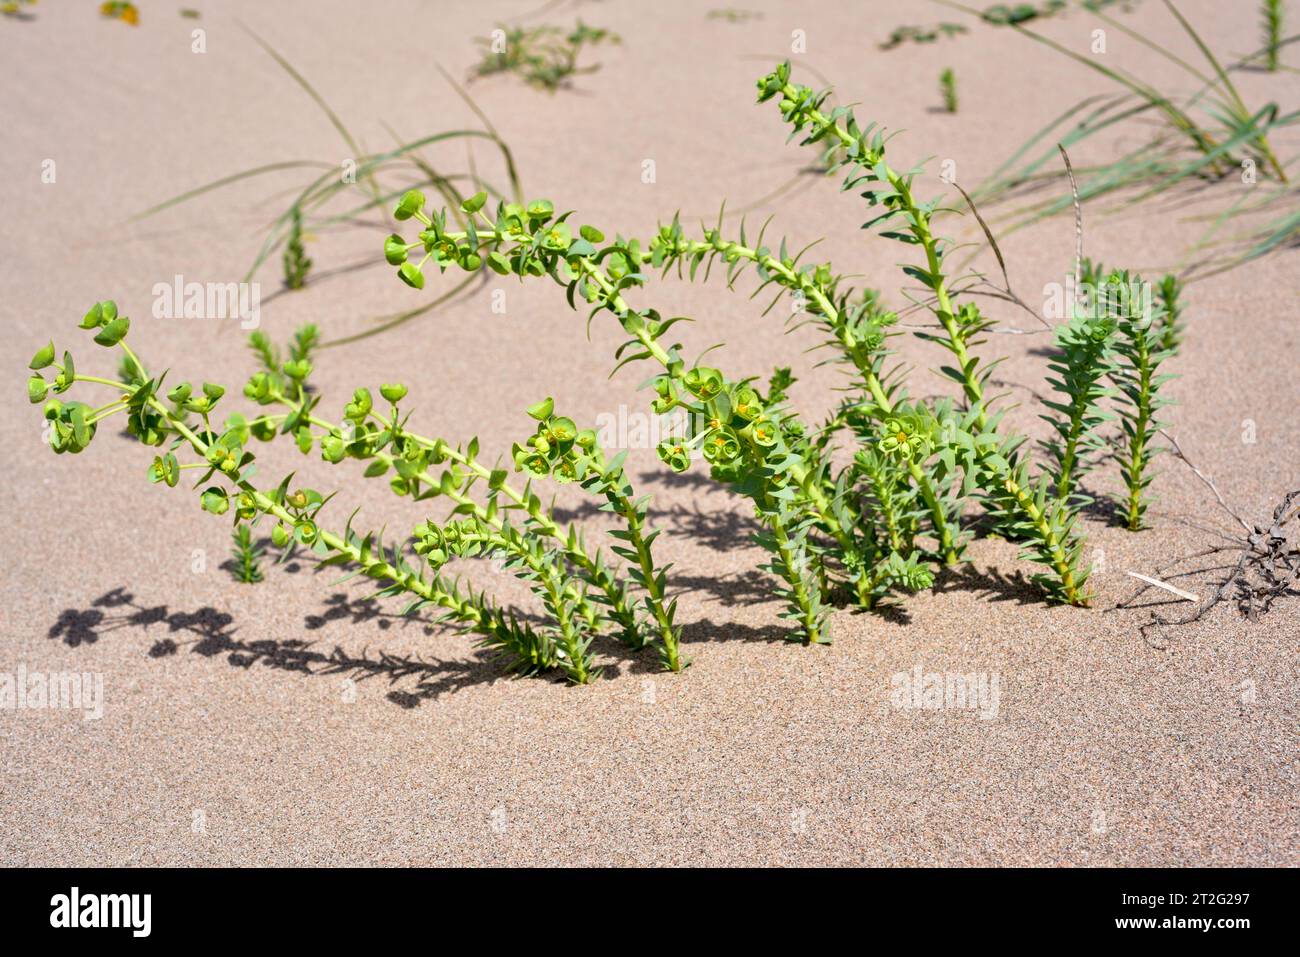 Sea spurge (Euphorbia paralias) is a perennial herb native to coast of Europe, northern Africa and western Asia. This photo was taken in Pals beach, G Stock Photo